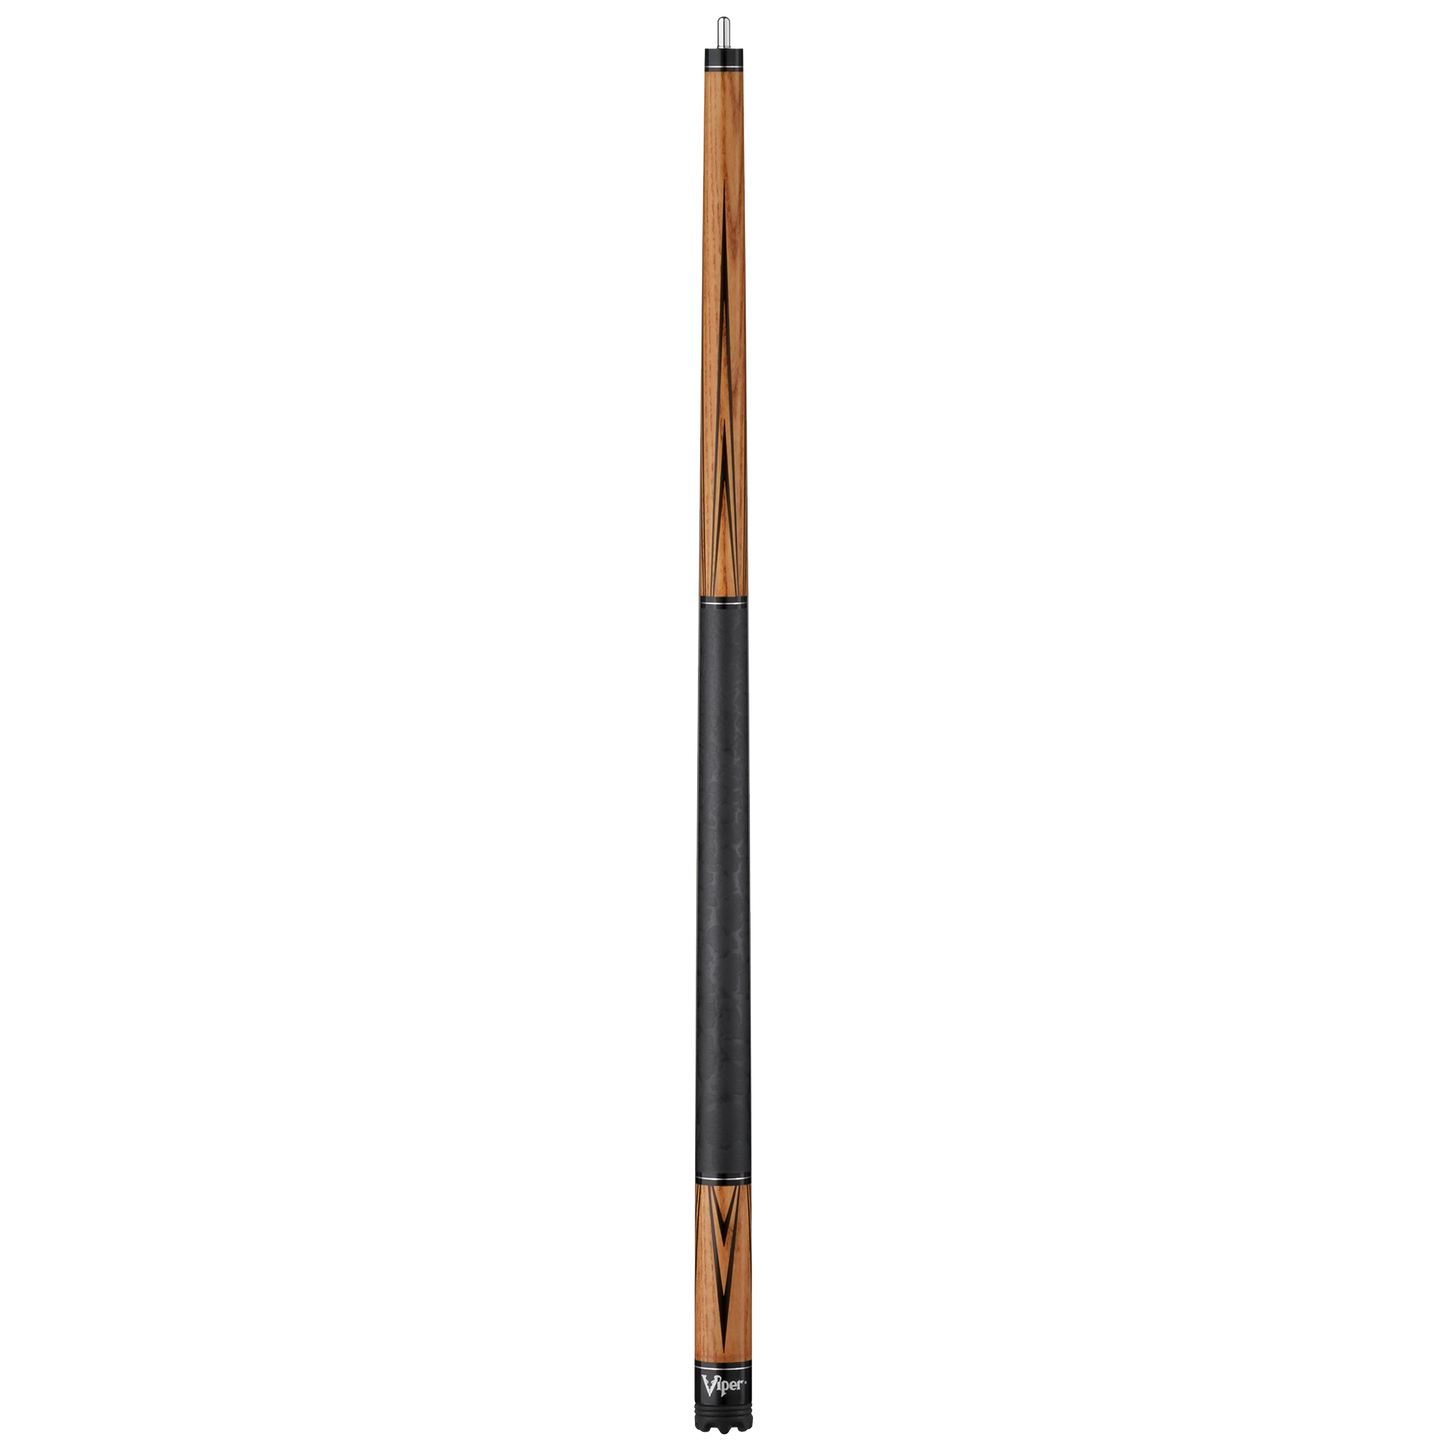 Viper Elementals Ash Cue with Amber Stain